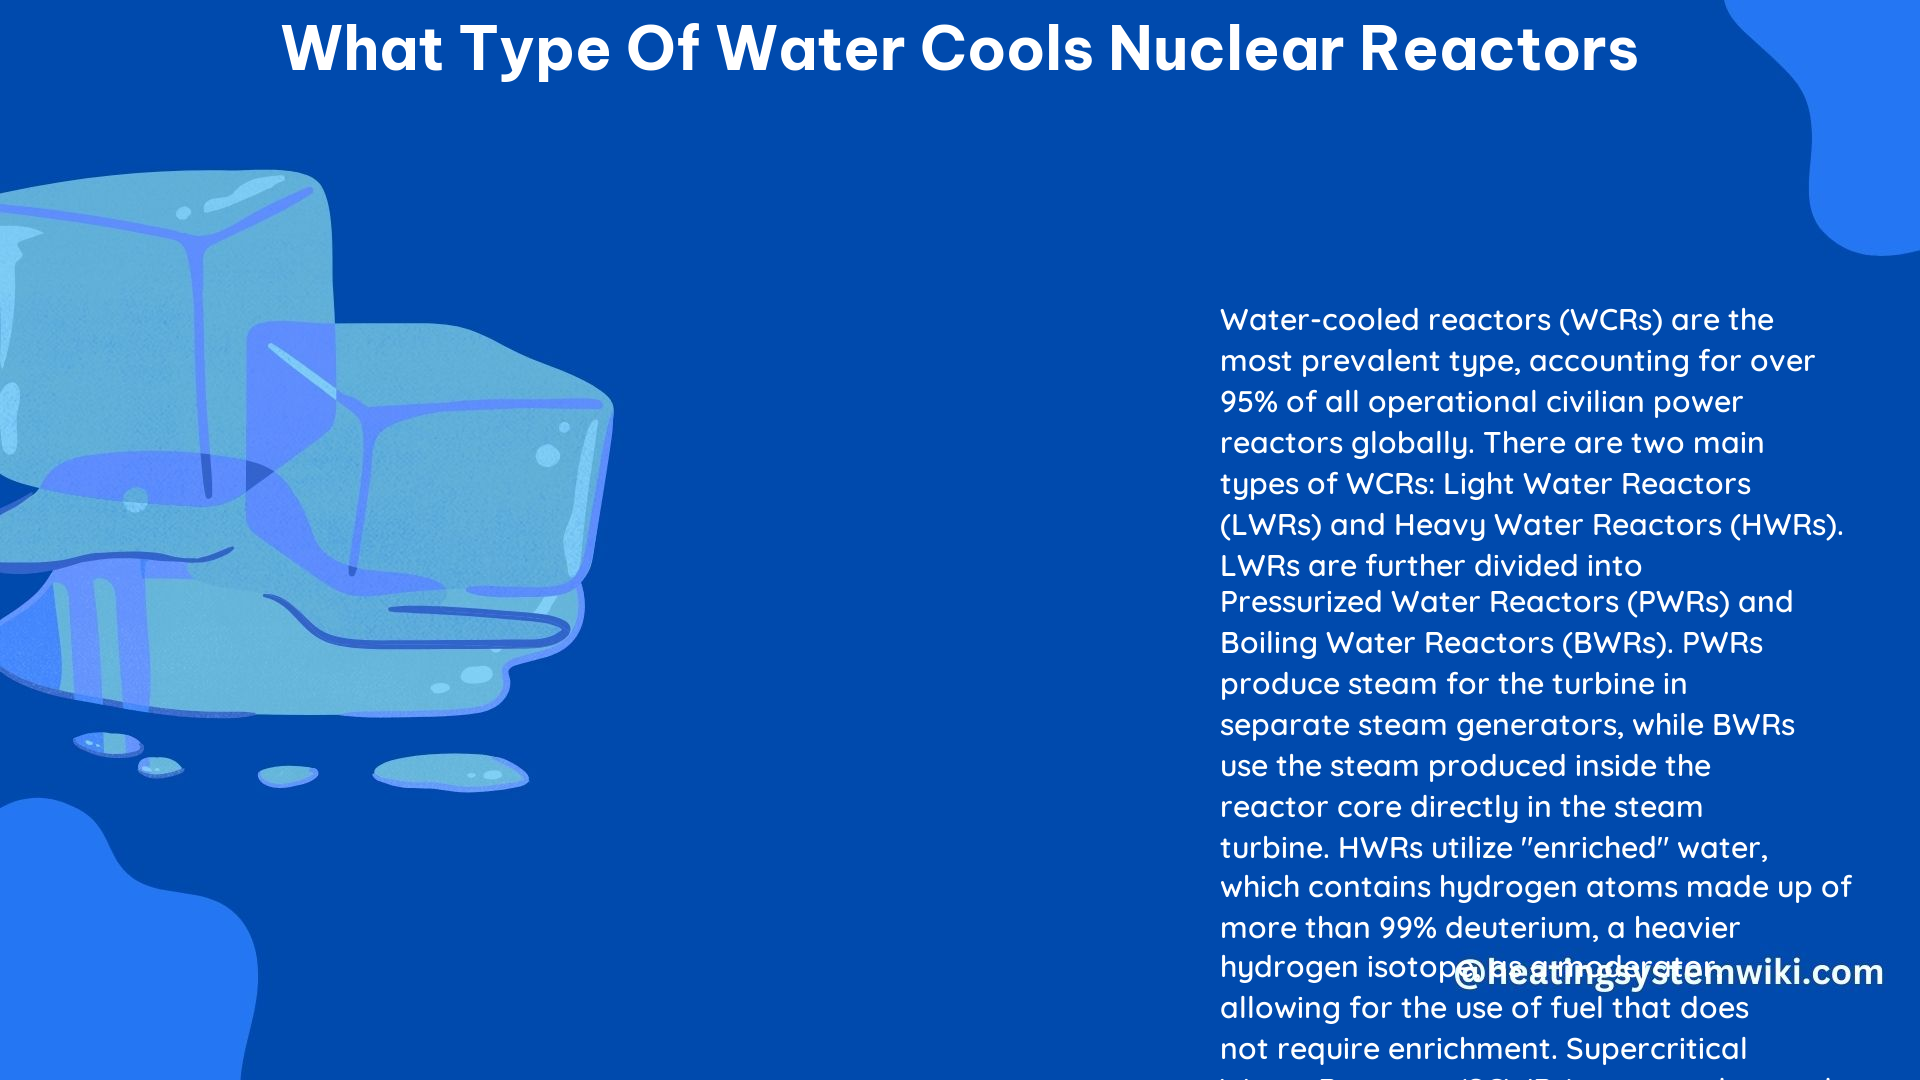 What Type of Water Cools Nuclear Reactors